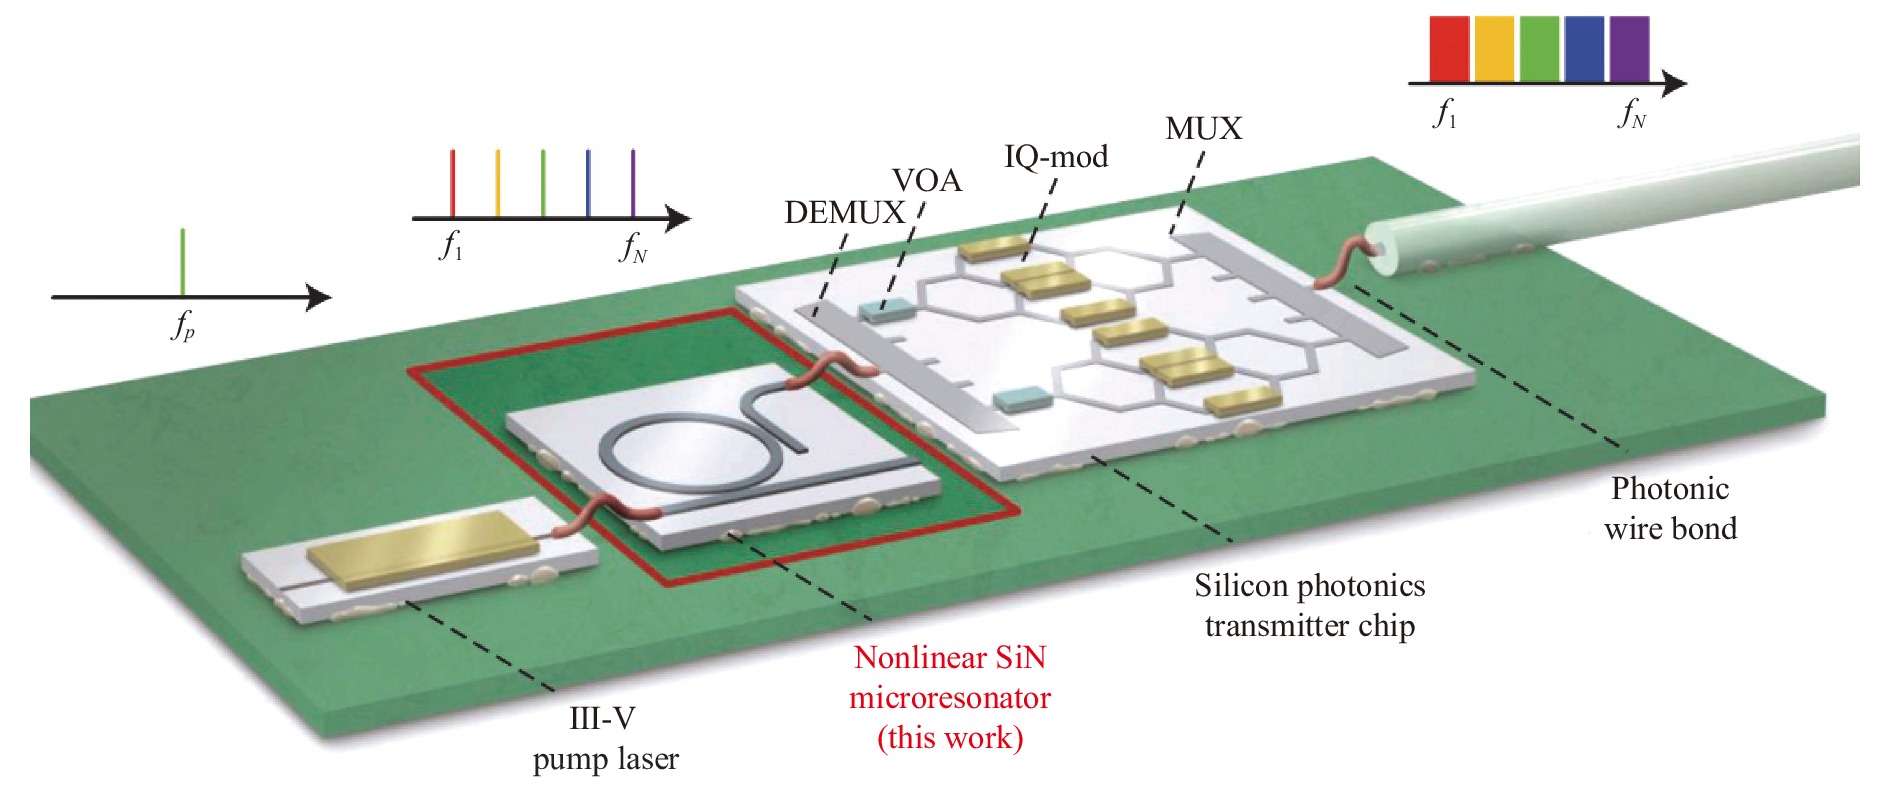 Artist’s view of future chip-scale optical transmitter using Kerr frequency comb as WDM light sources[7]